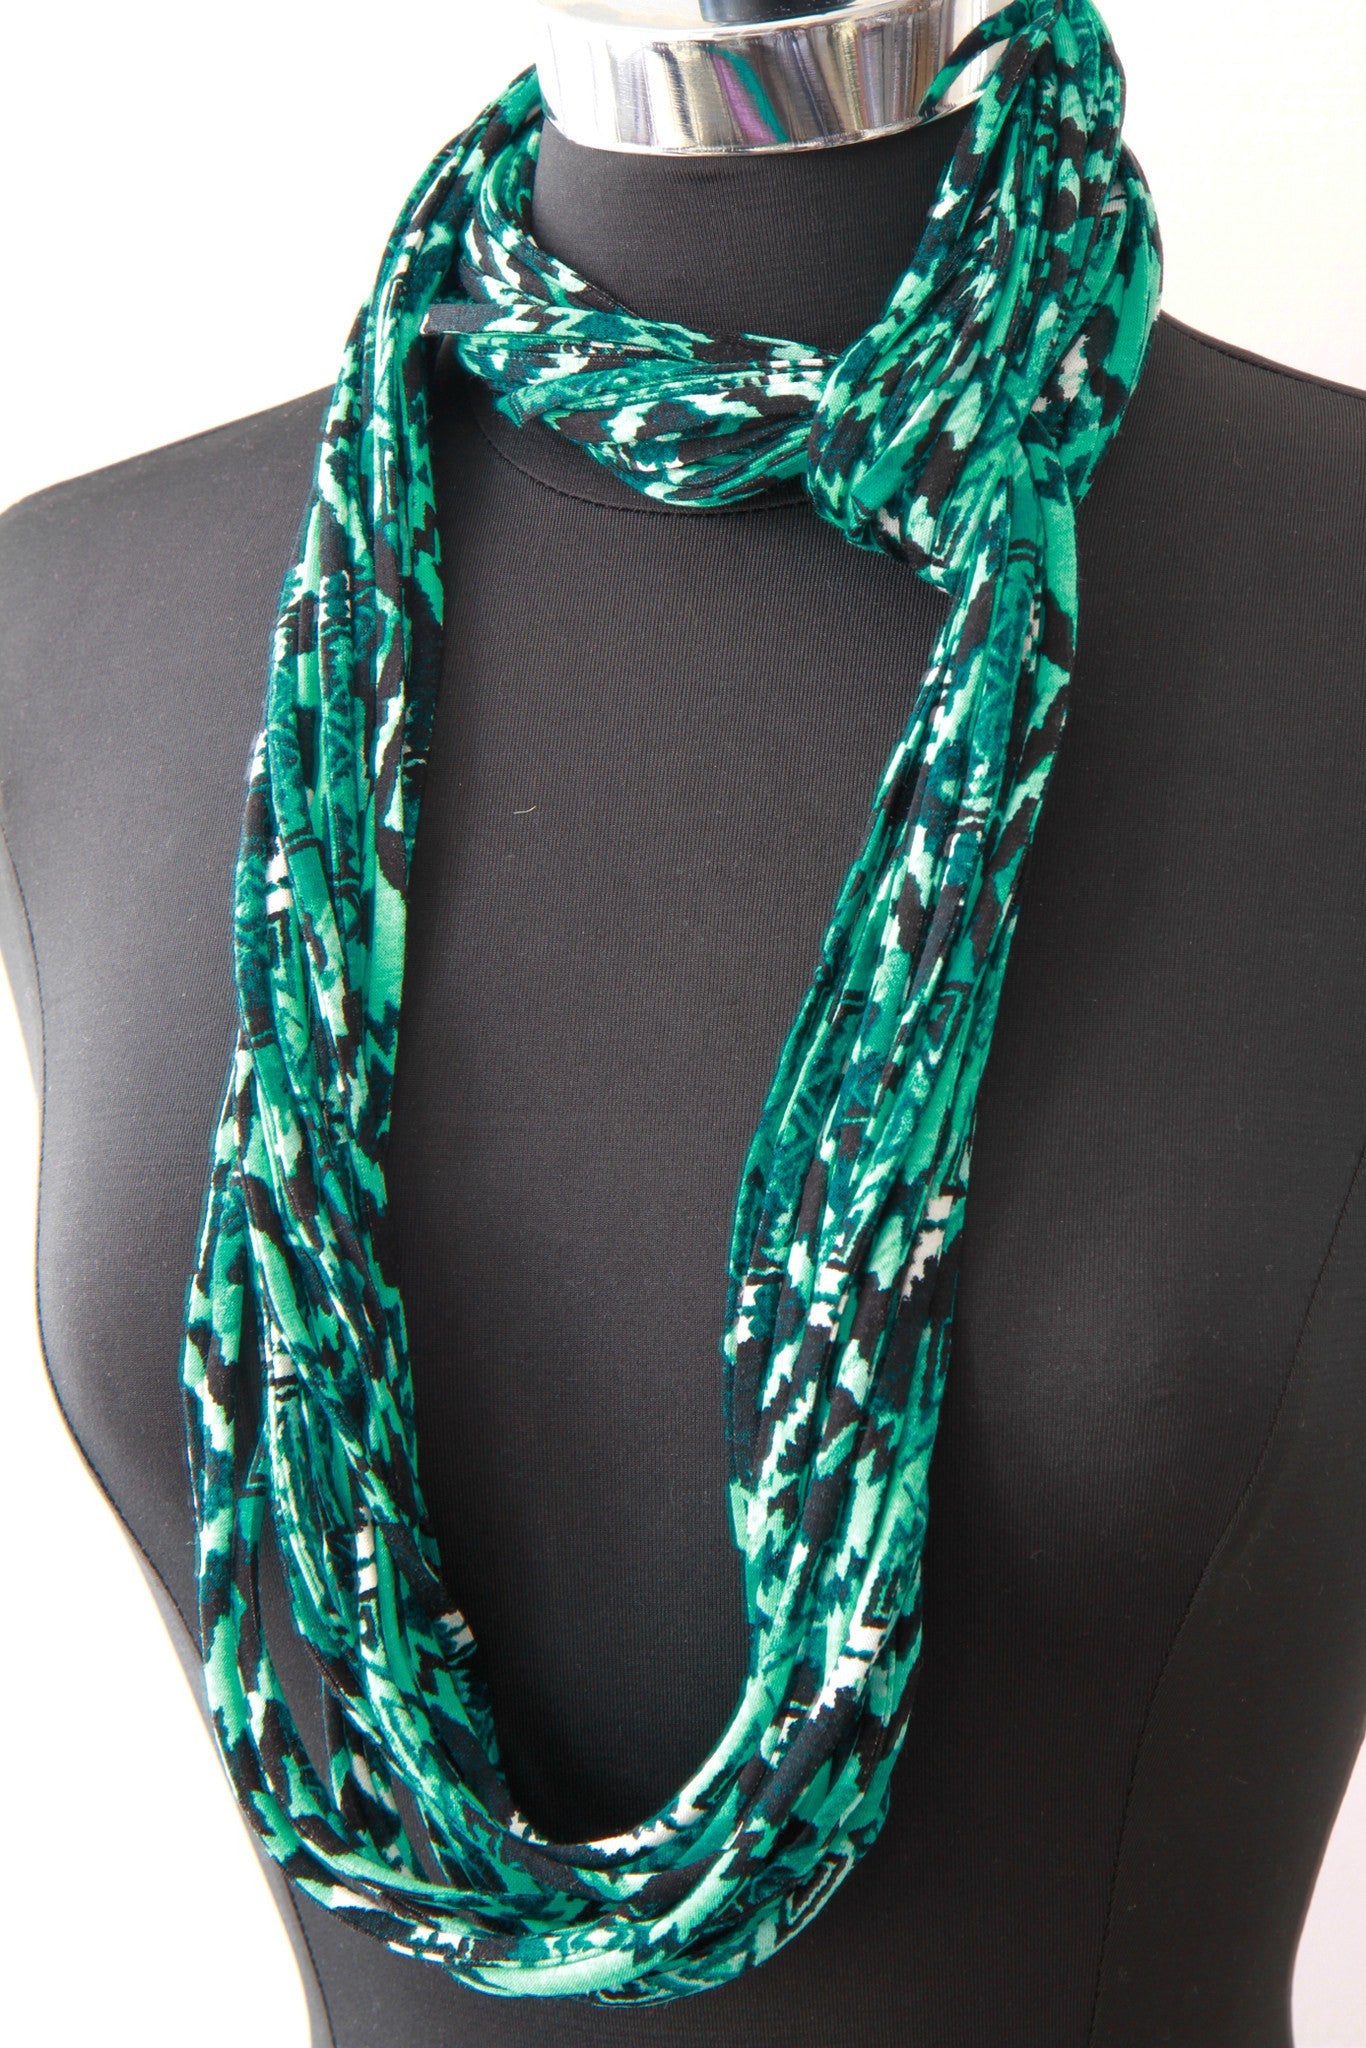 Teal Print Infinity Scarf or Necklace for Women